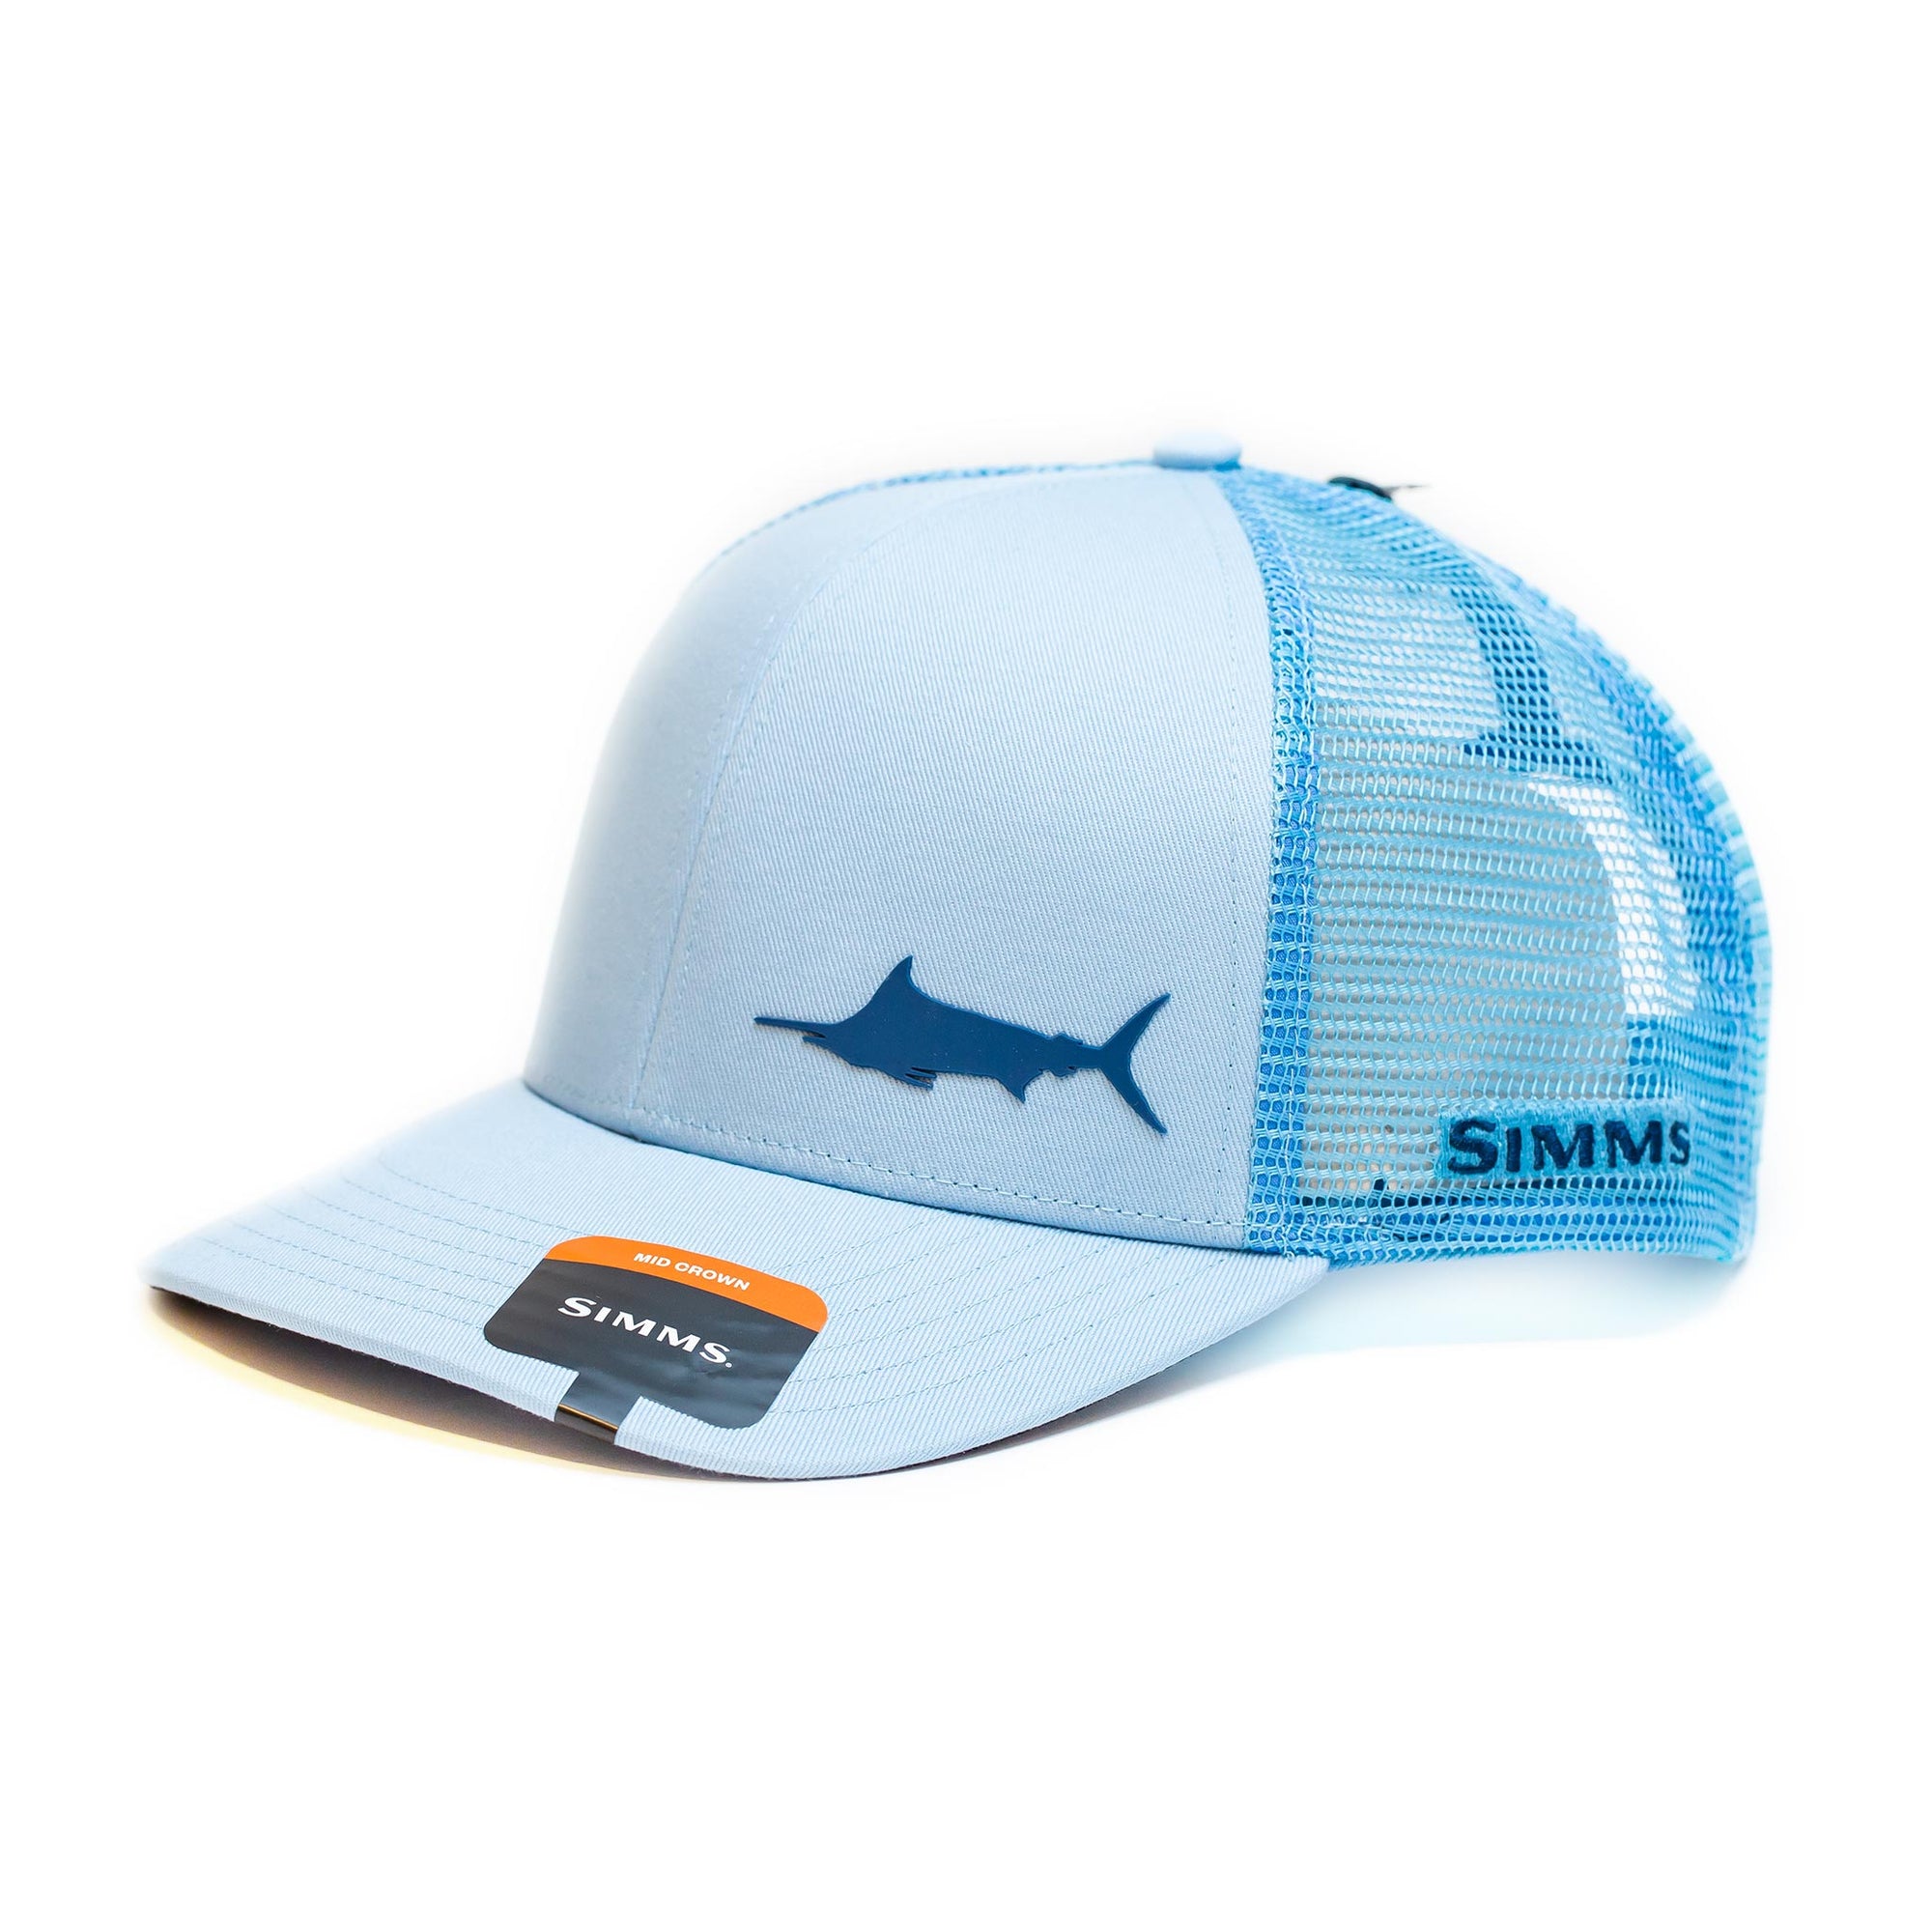 Simms Womens Superlight Solar Sombrero - Compleat Angler Nedlands Pro Tackle